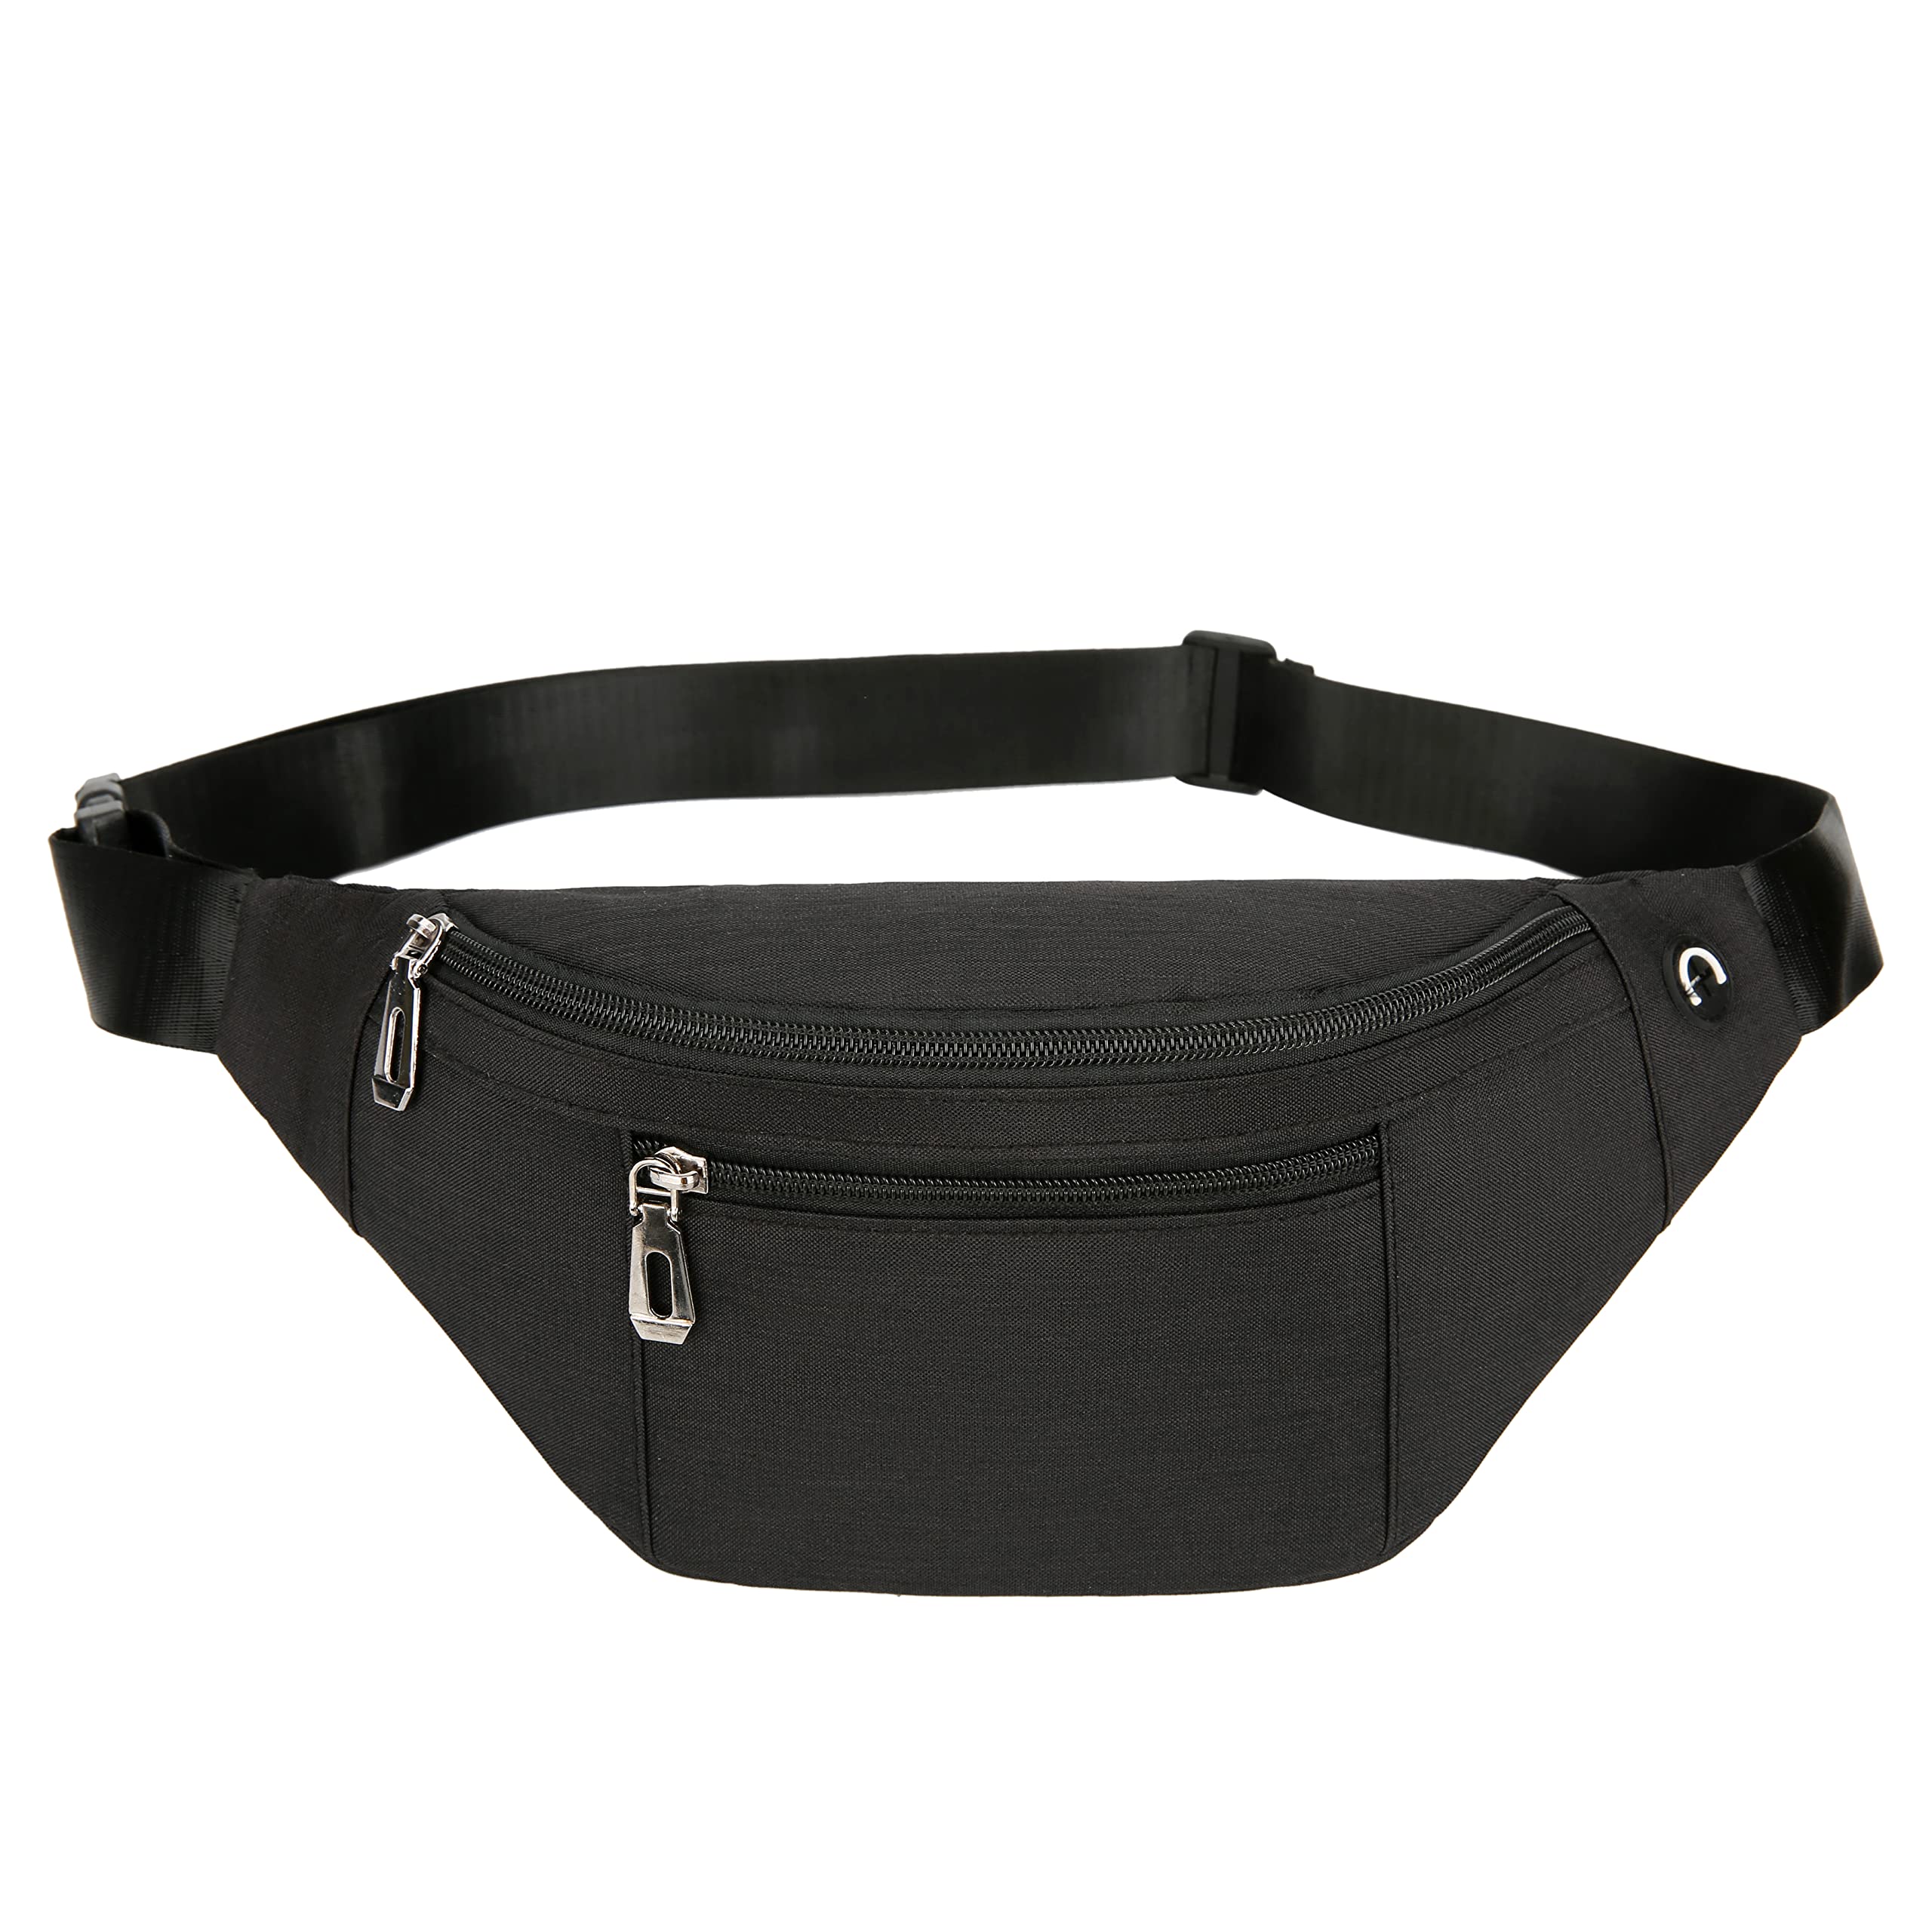 Fanny Pack for Women Men Belt Bag Fashion Chest Waist Packs Hip Bumbags for  Outdoors Shopping Workout Traveling Hiking (Black)